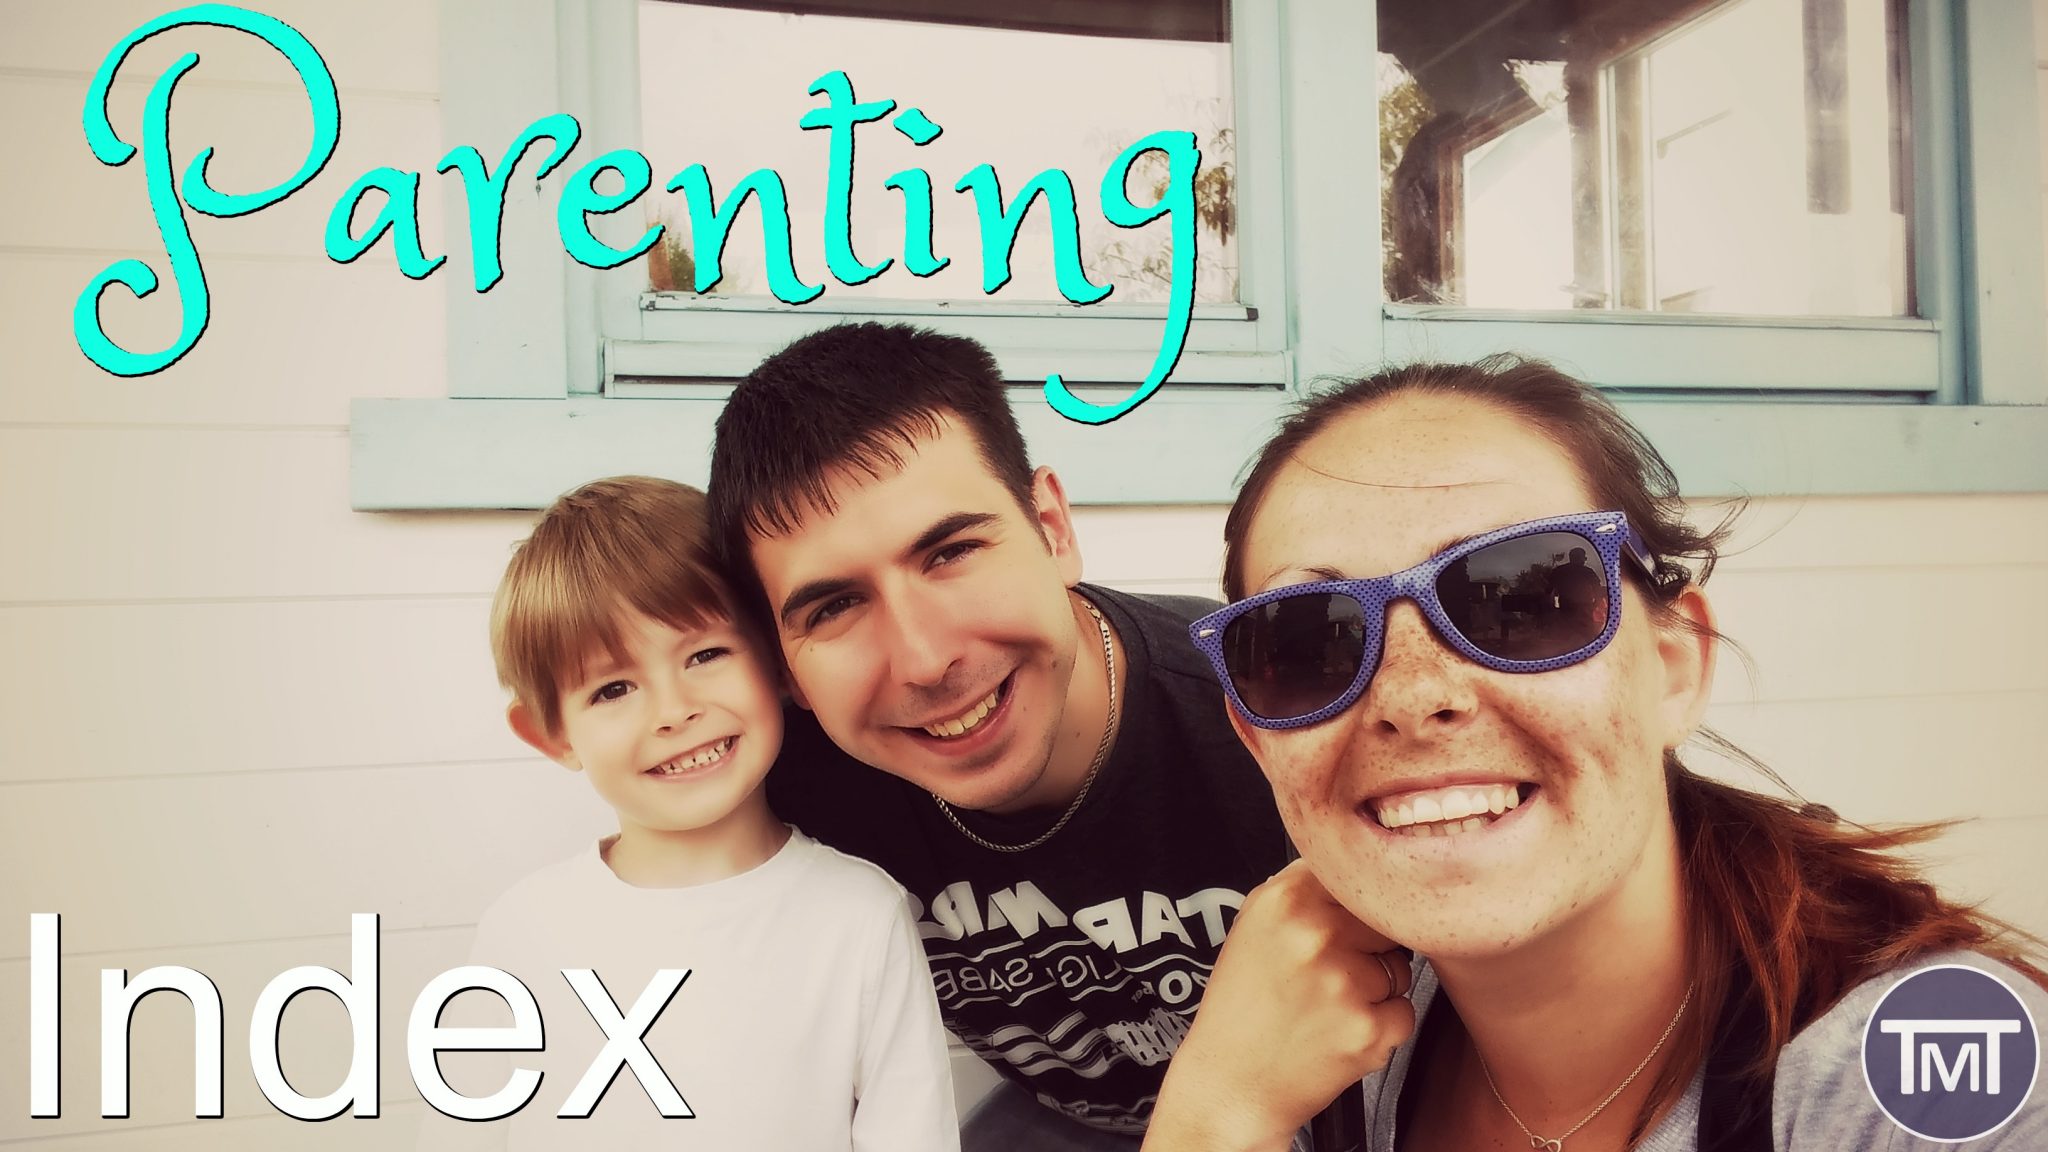 Never miss a parenting post again! - The parenting Index for The Mummy toolbox